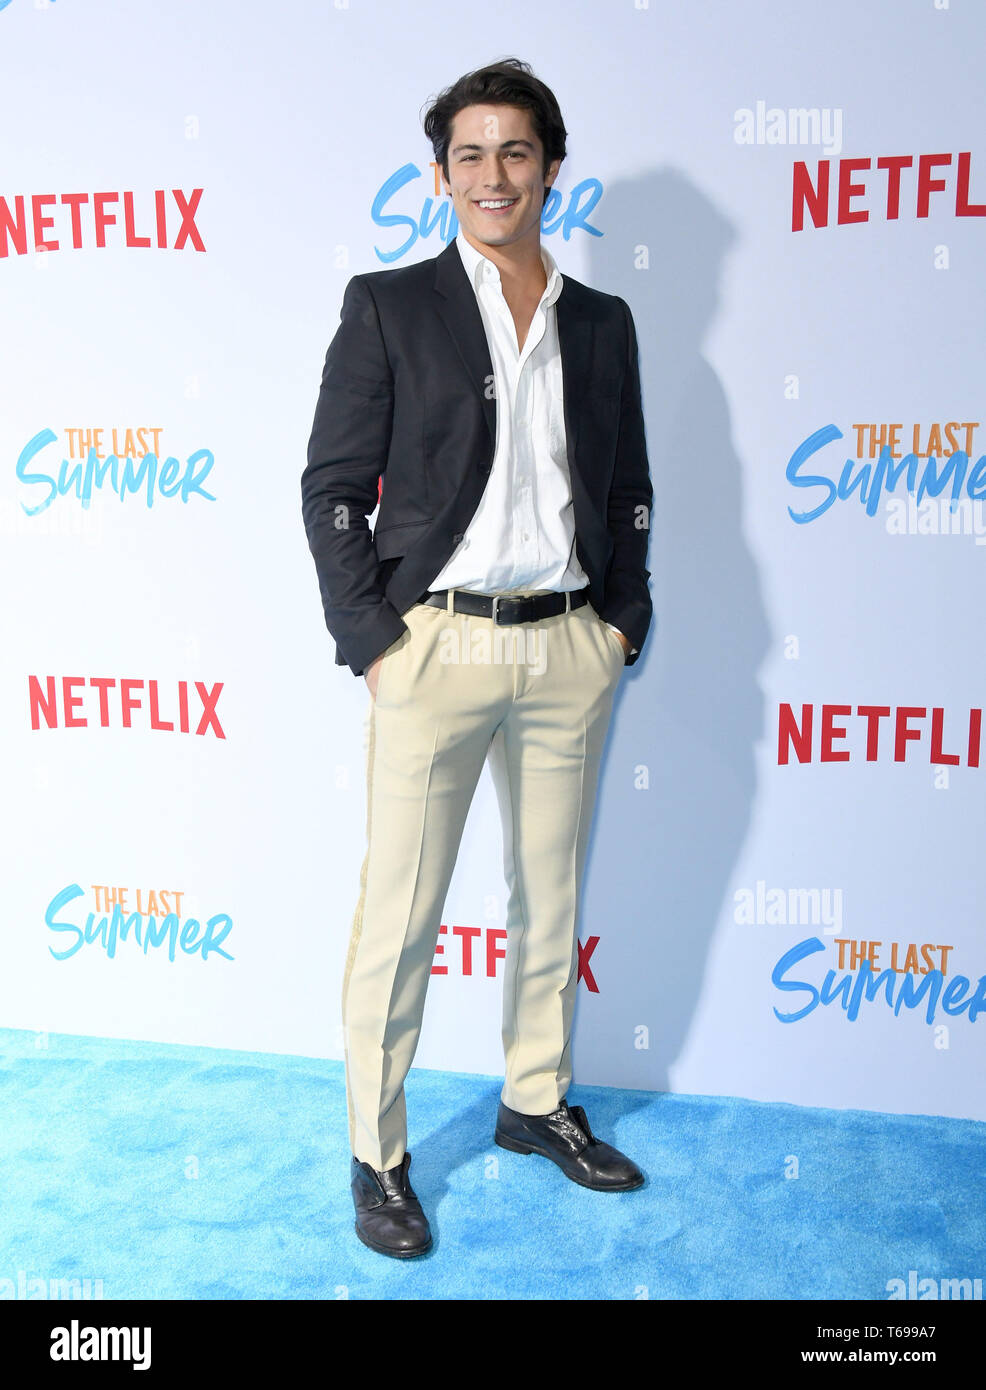 April 29, 2019 - Hollywood, California, U.S. - 29 April 2019 - Hollywood, California - Wolfgang Novogratz. Netflix's ''The Last Summer'' Los Angeles Special Screening held at TCL Chinese 6 Theatre. Photo Credit: Birdie Thompson/AdMedia (Credit Image: © Birdie Thompson/AdMedia via ZUMA Wire) Stock Photo